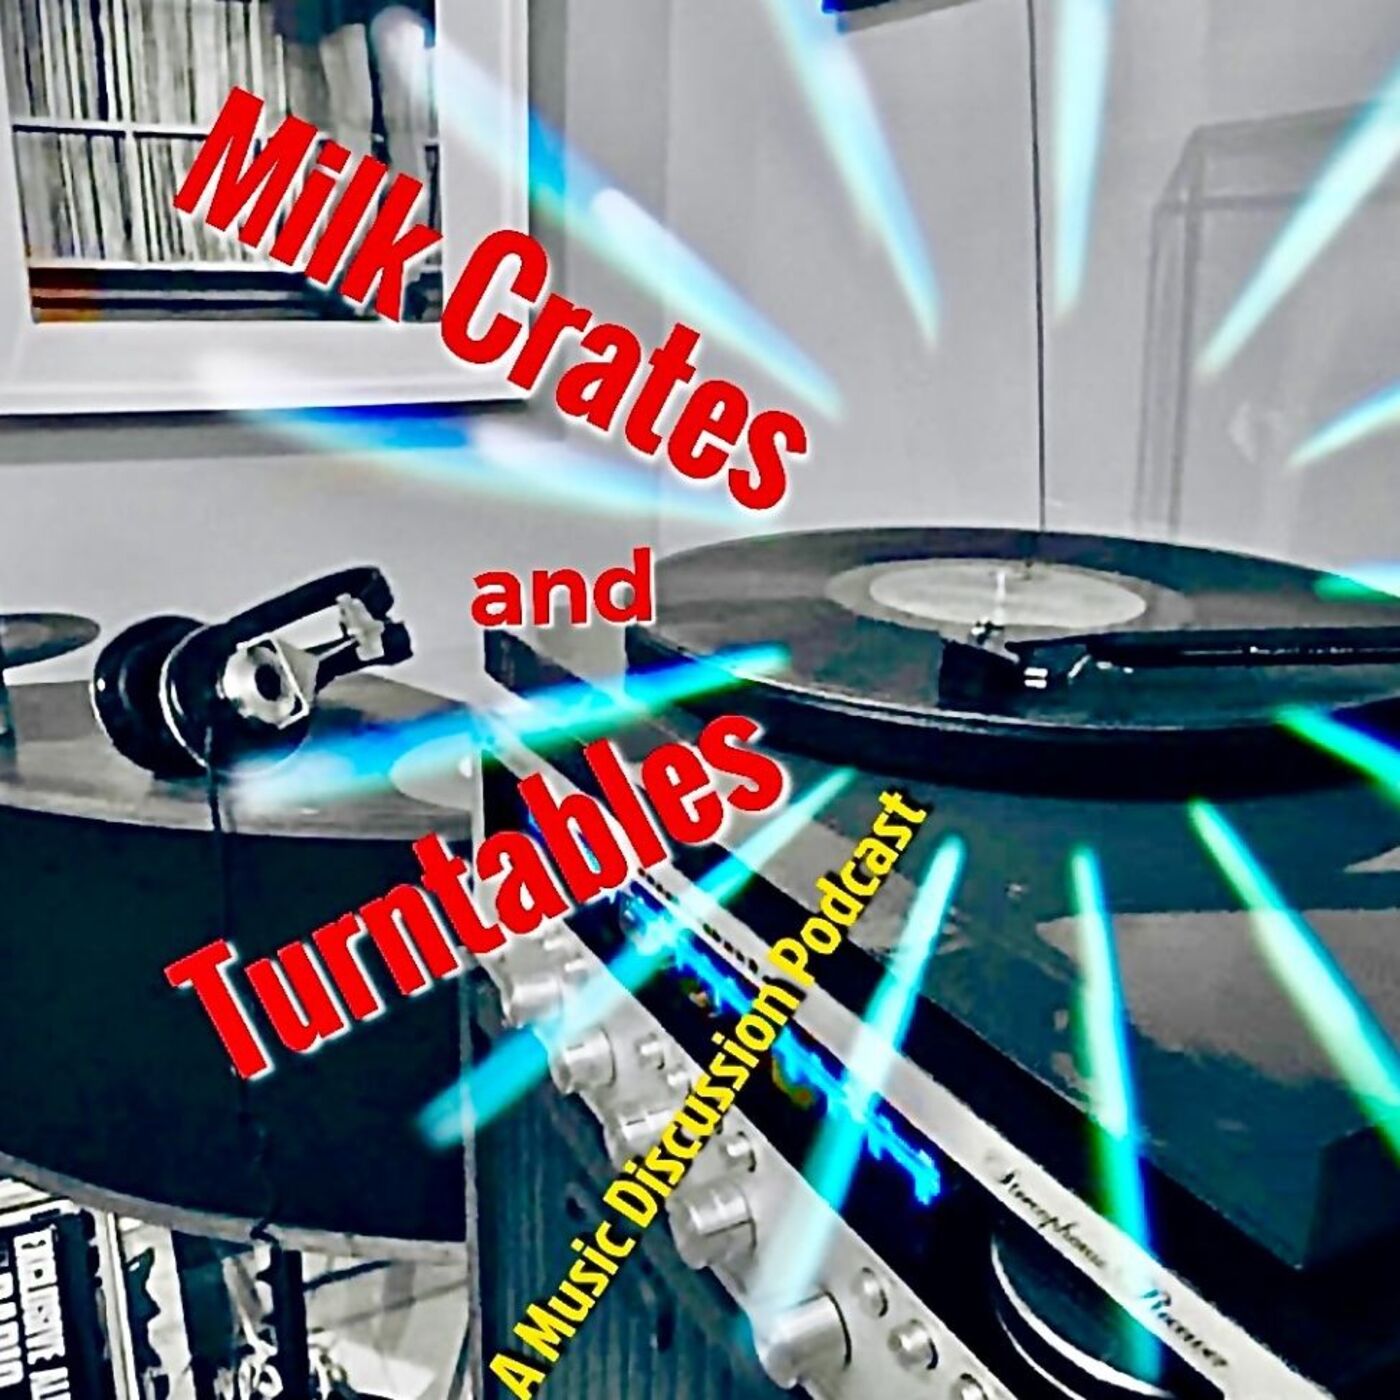 Fresh update on "bruce springsteen" discussed on Milk Crates and Turntables. A Music Discussion Podcast